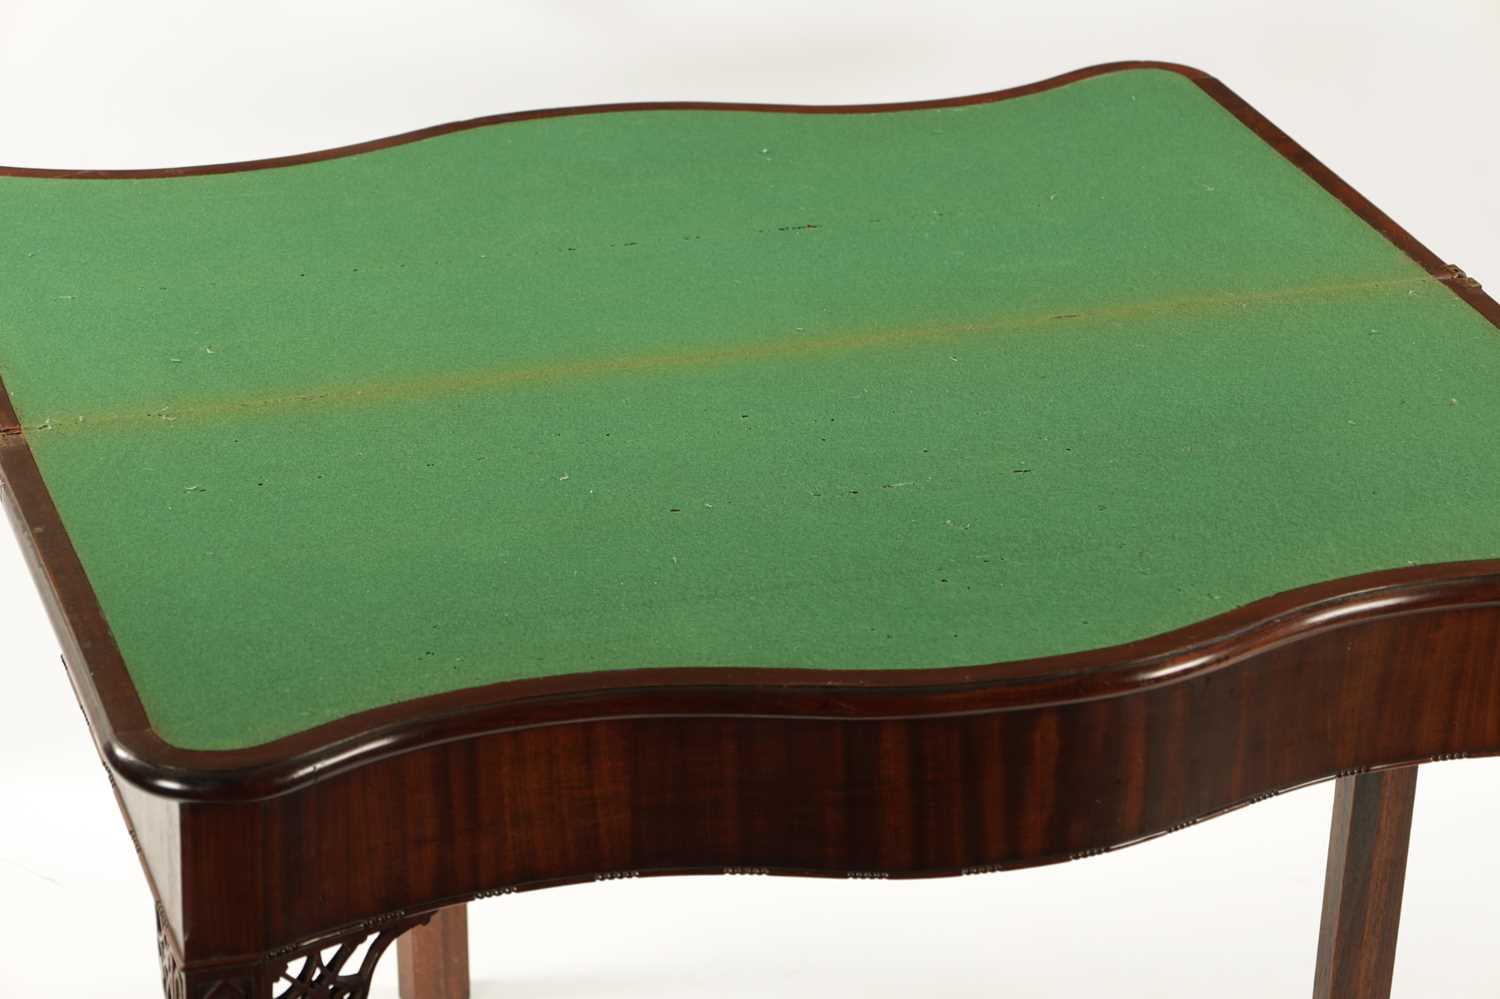 A FINE OVERSIZED GEROGE III SERPENTINE MAHOGANY TEA-TABLE IN THE MANNER OF THOMAS CHIPPENDALE - Image 8 of 8